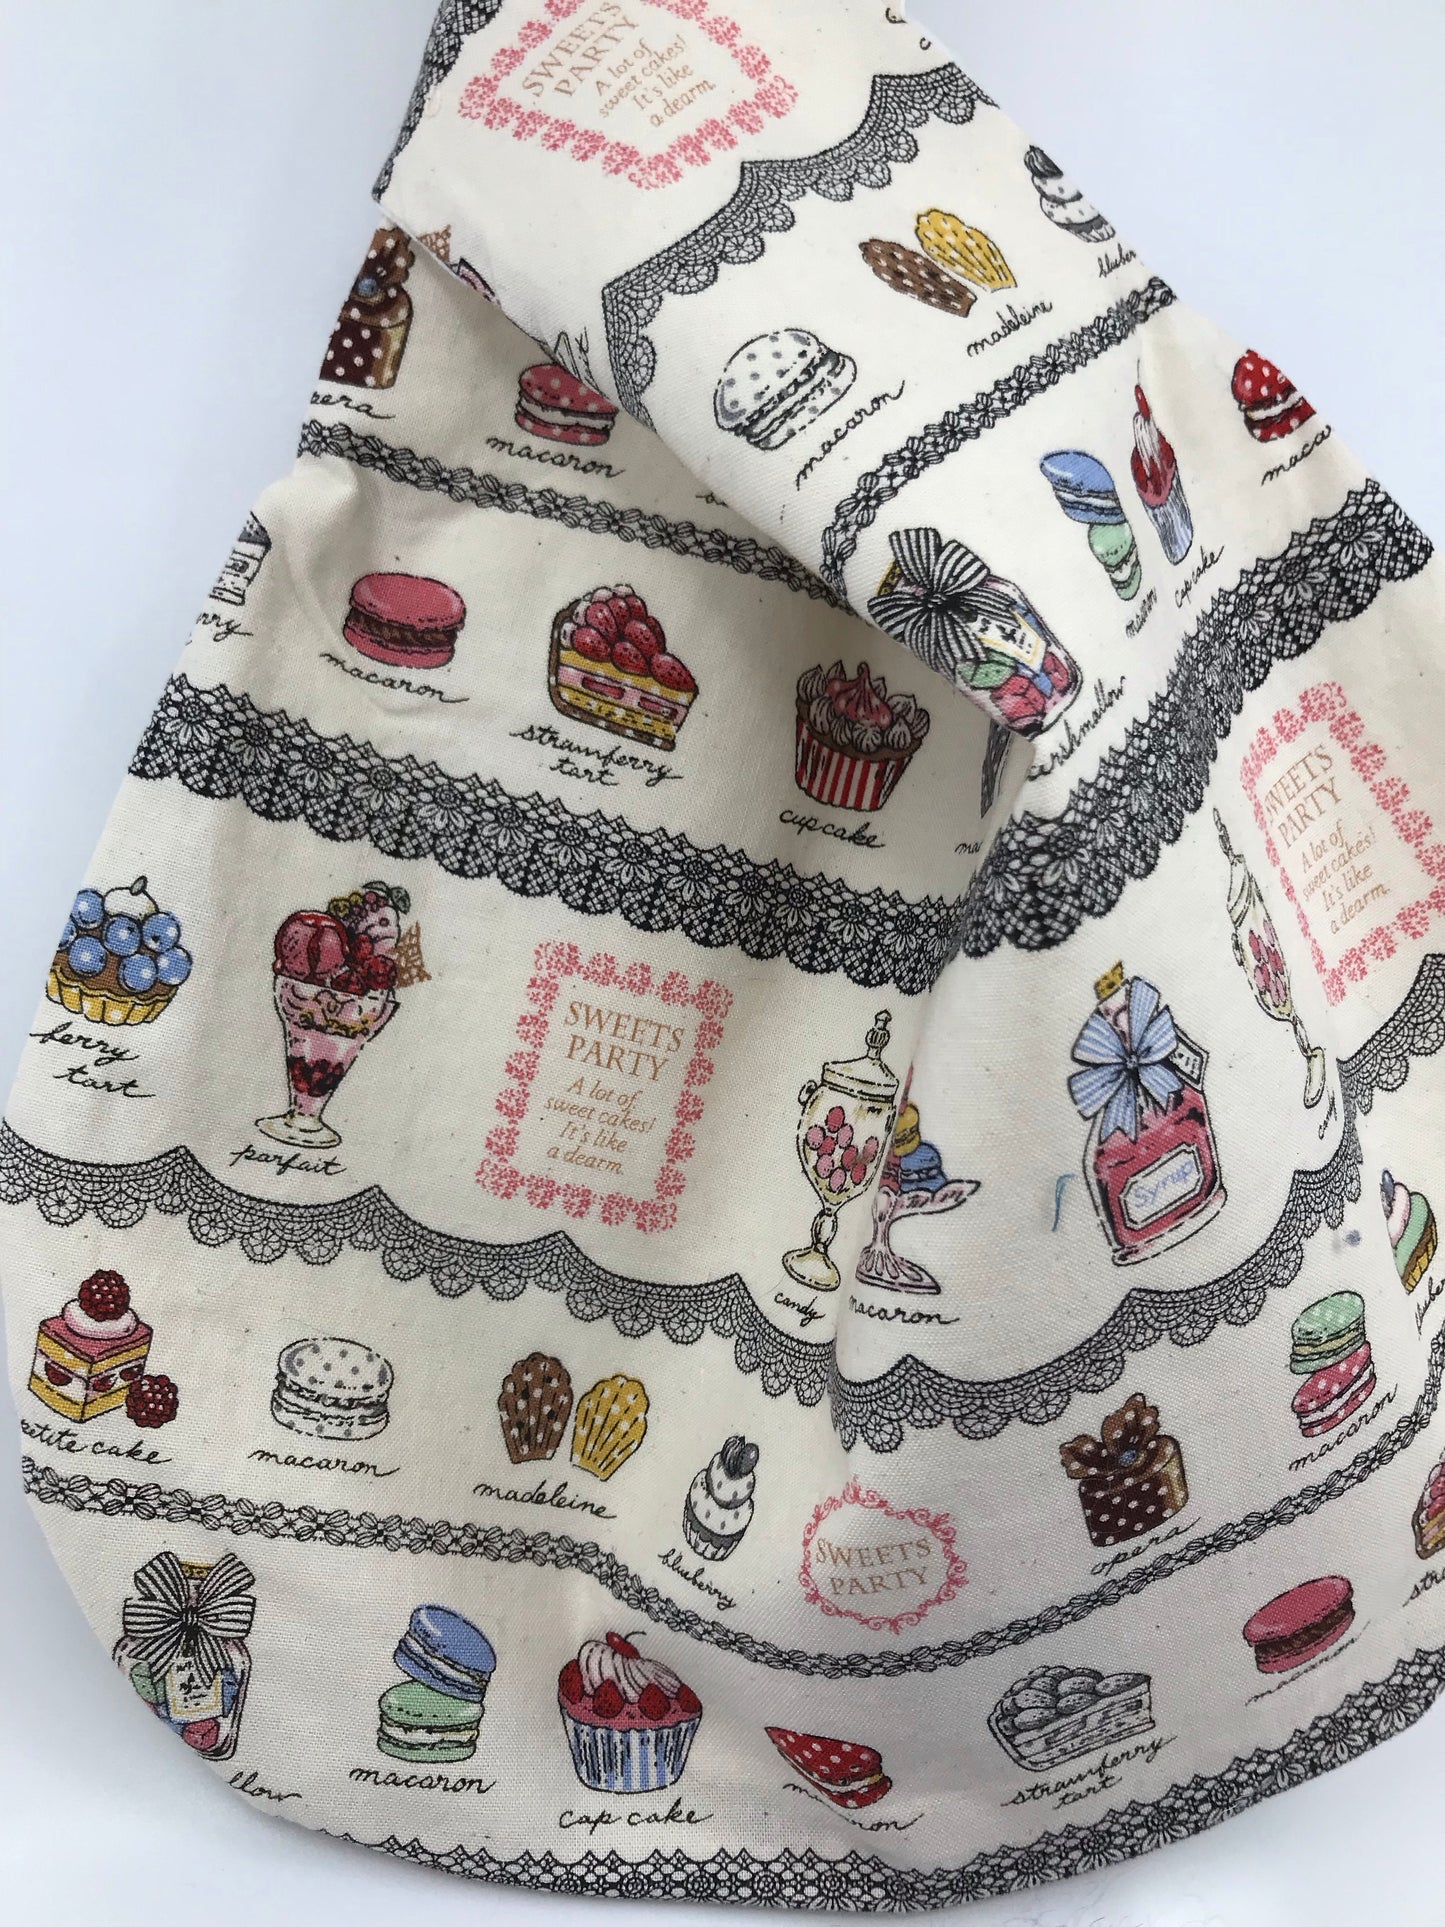 Knot Bag || Sweets Party Print with Black Lace || Japanese Fabric Project Bag